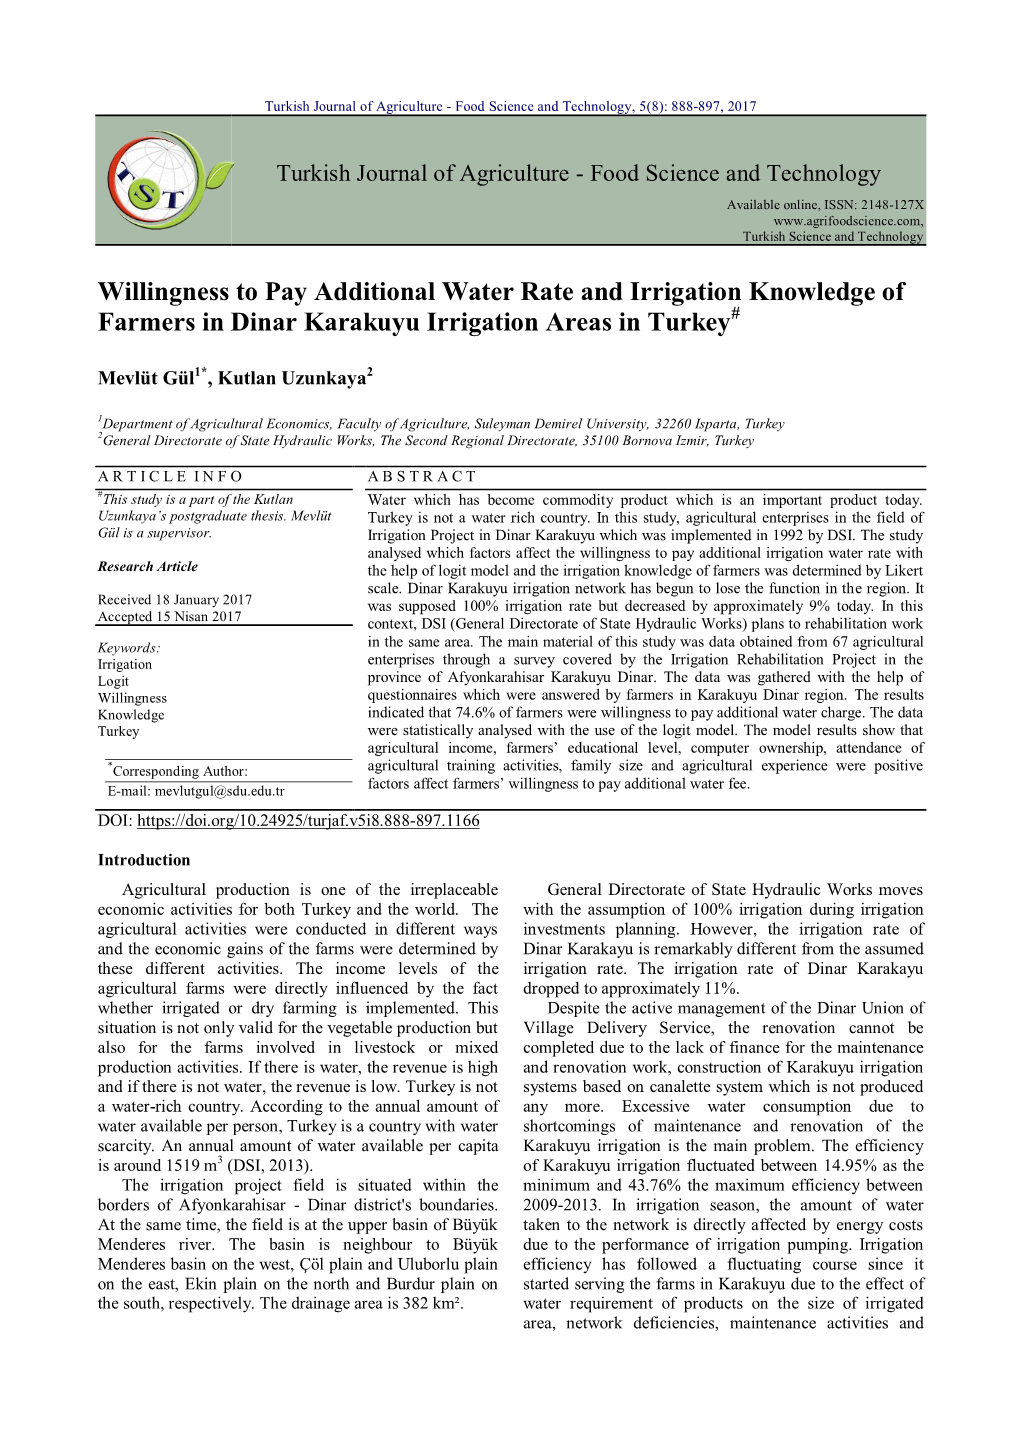 Willingness to Pay Additional Water Rate and Irrigation Knowledge of Farmers in Dinar Karakuyu Irrigation Areas in Turkey